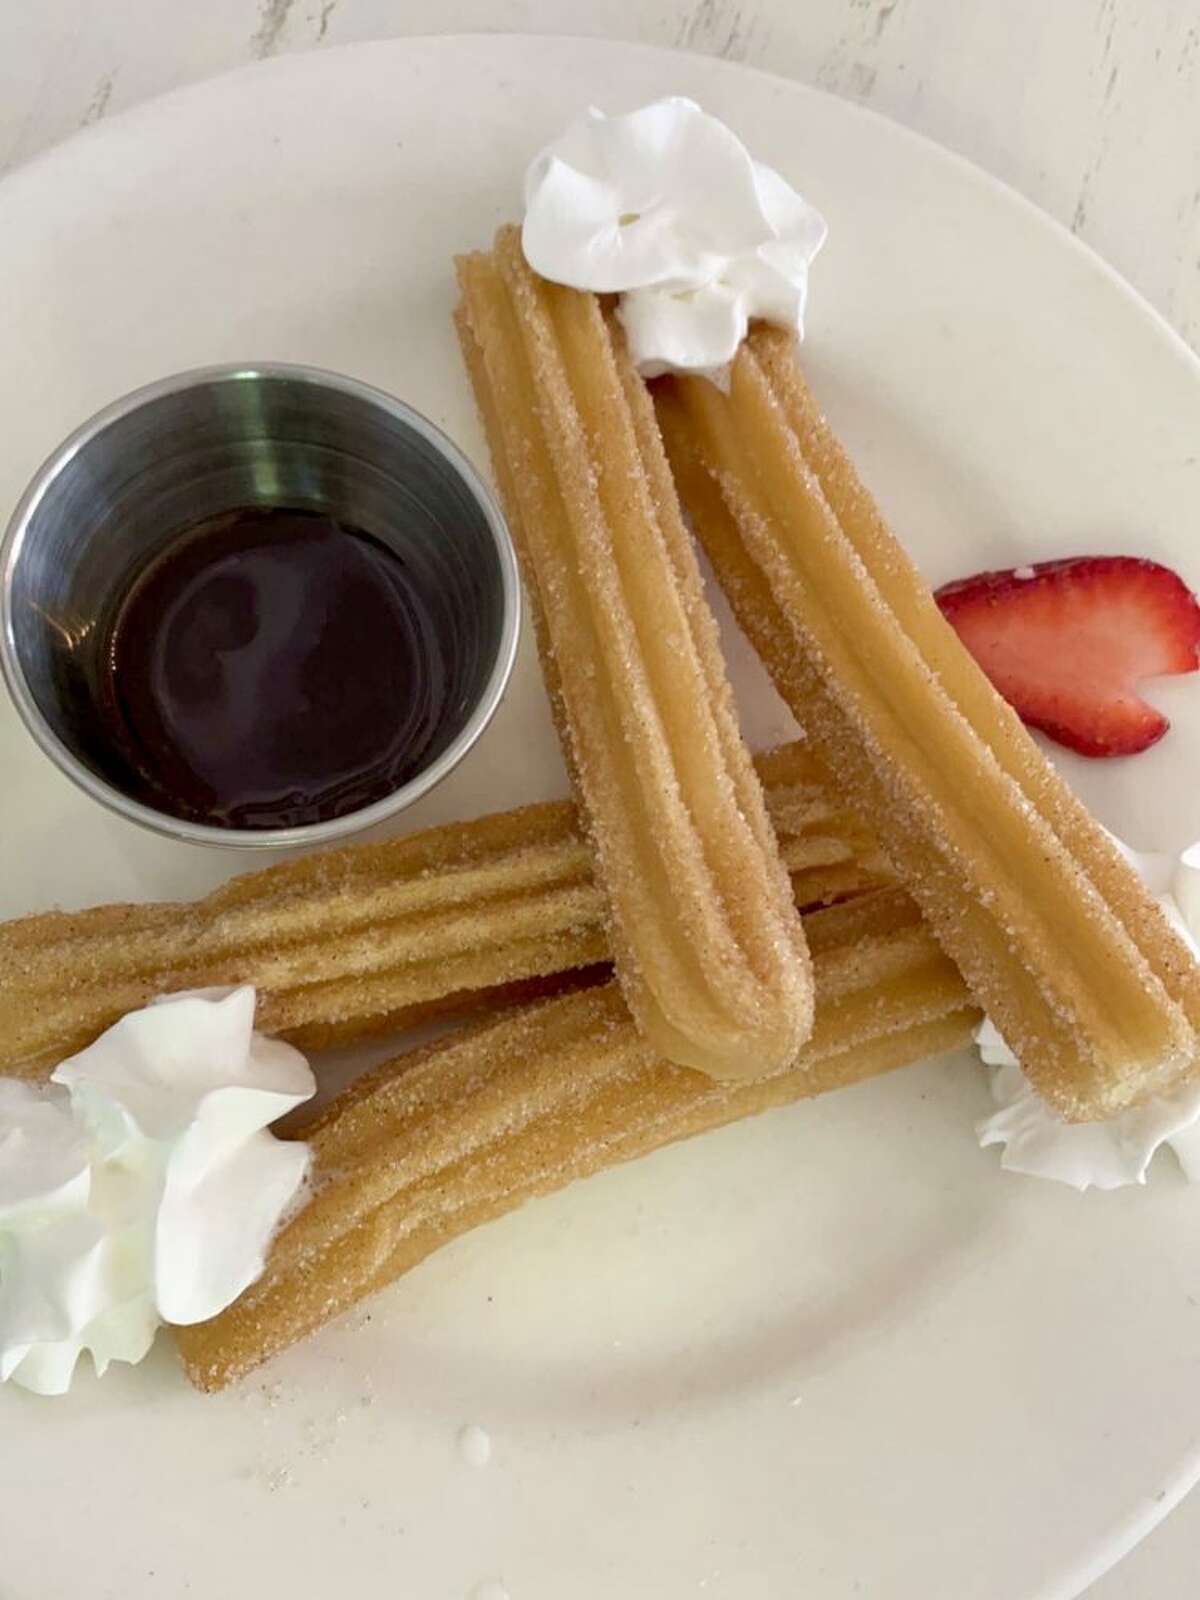 The churros at Cielito Cafe are presented with a chocolate dipping sauce.